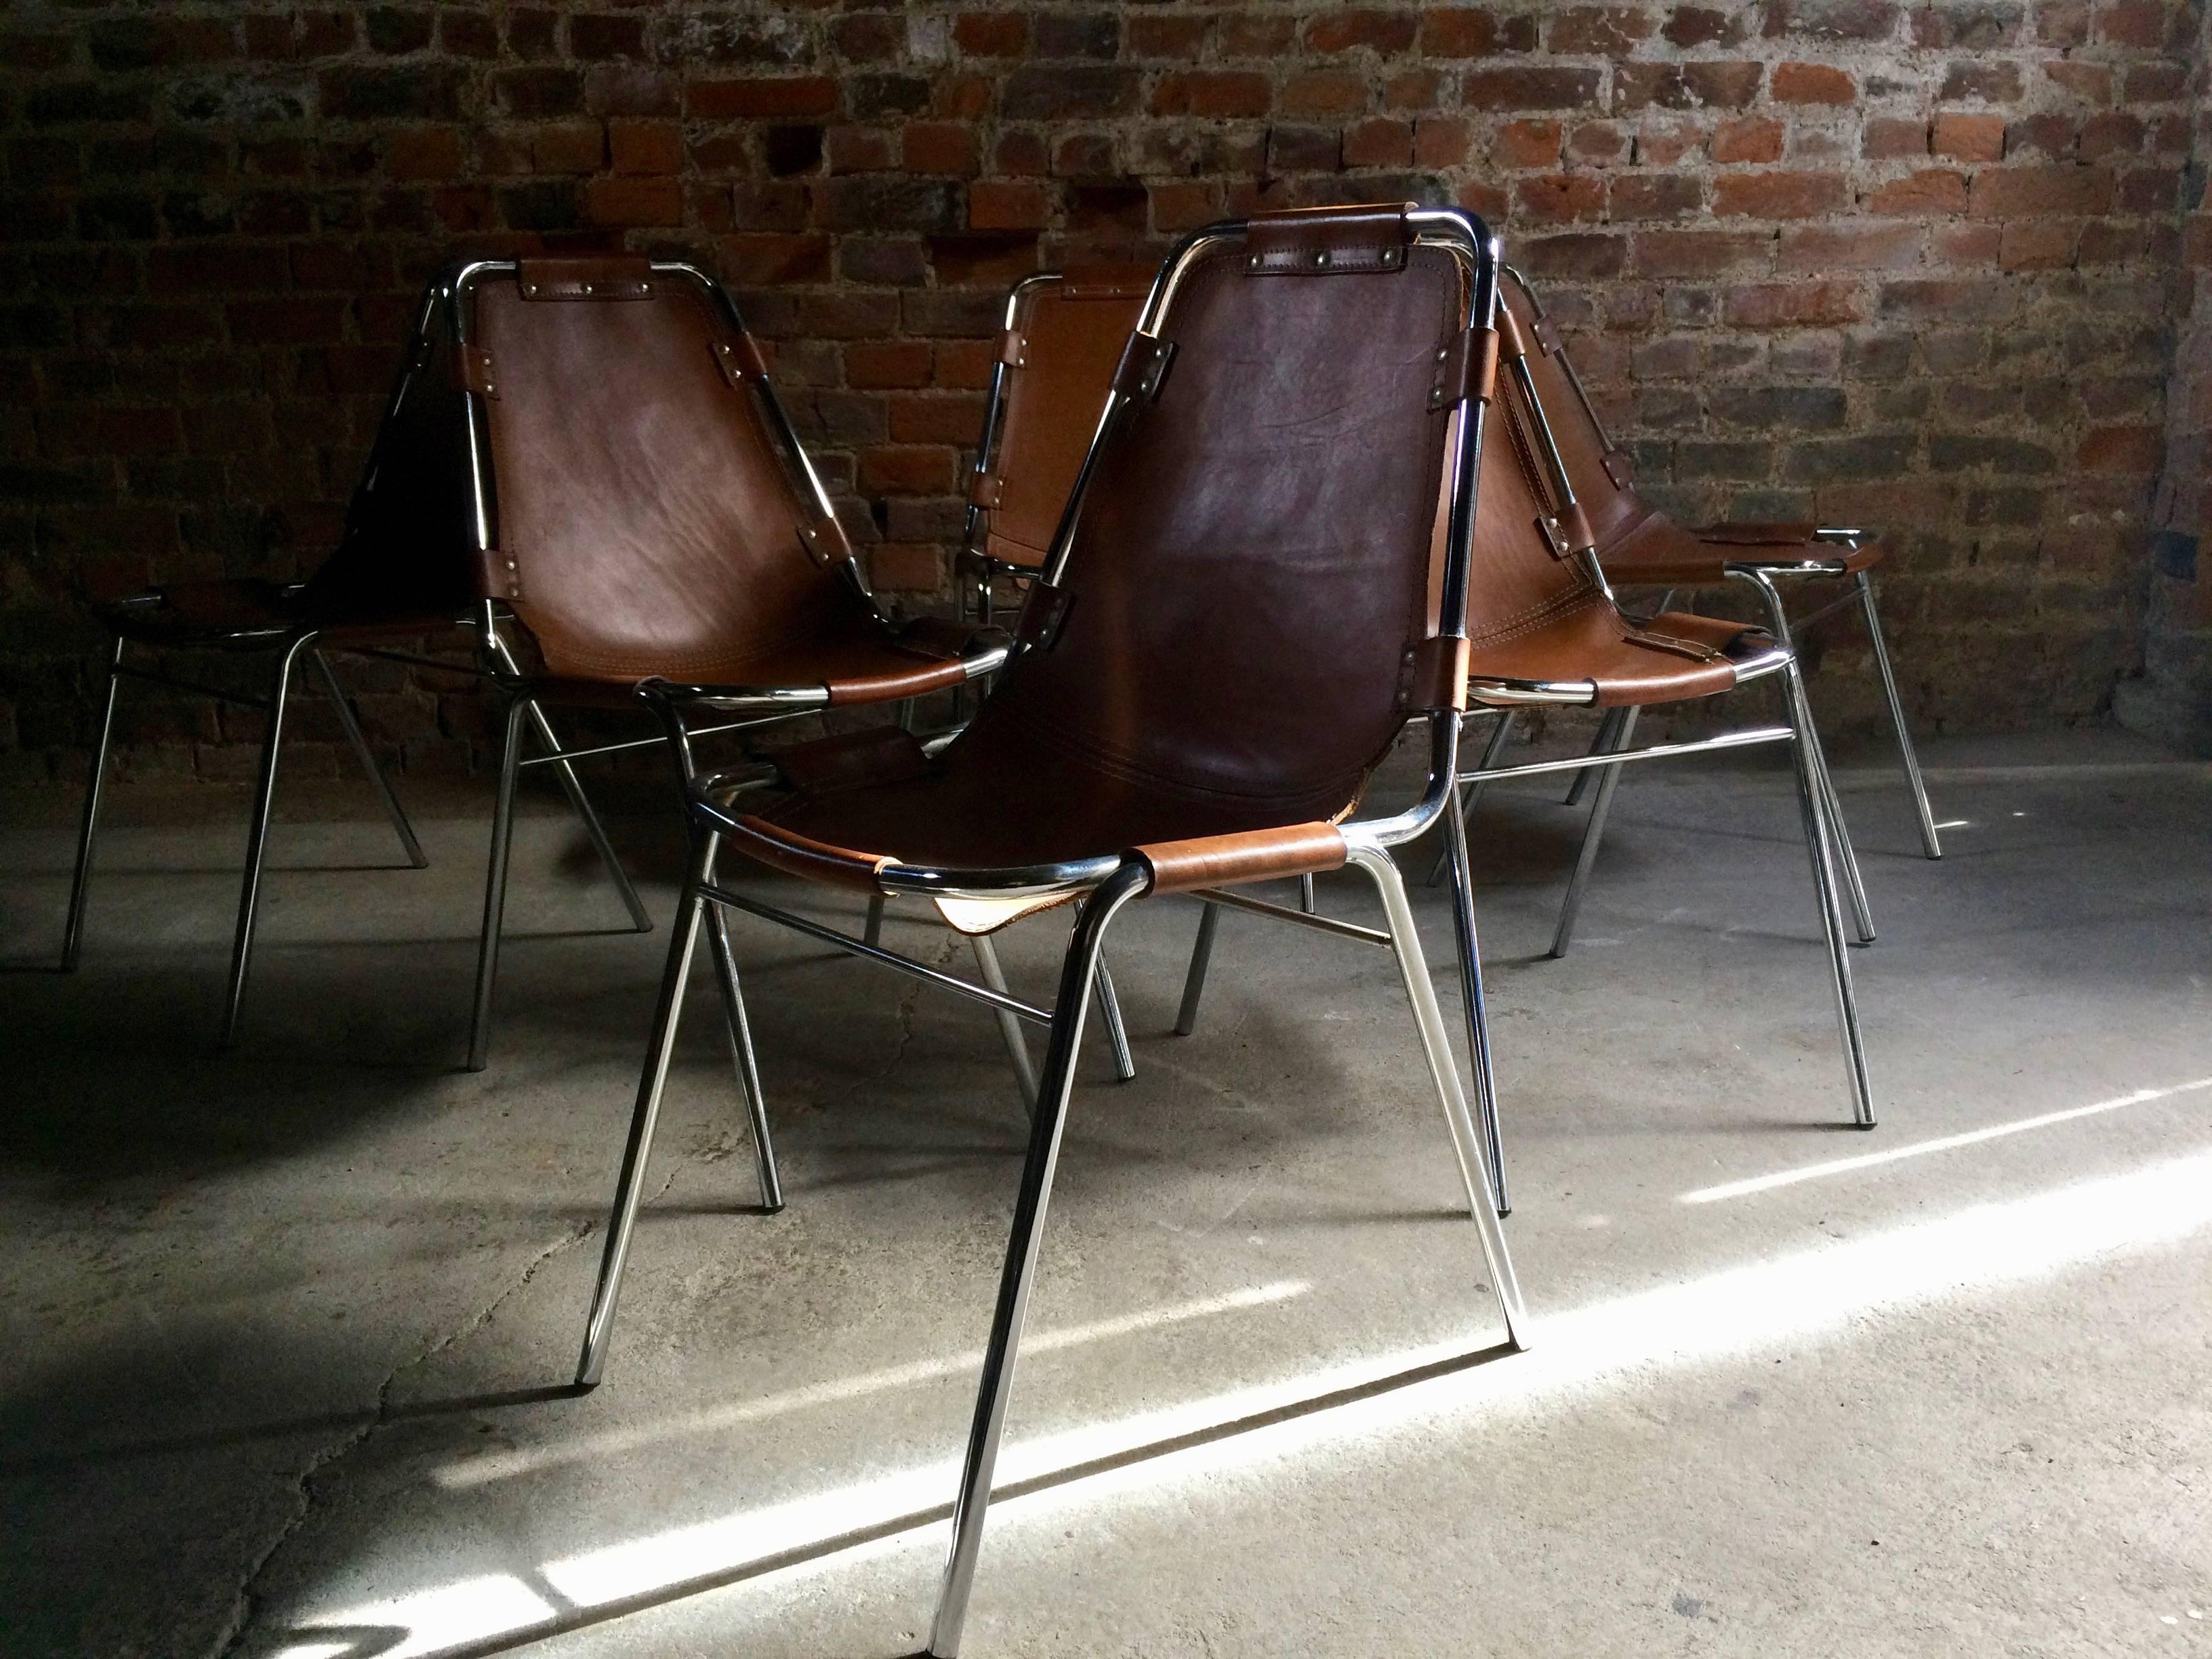 Original set of six tan leather 'Les Arcs' dining chairs designed by Charlotte Perriand for Cassina in the 1960s for the Les Arcs ski resort, each chair consists of a chrome tubular frame with brown leather seats, this set dates to the mid-1960s and